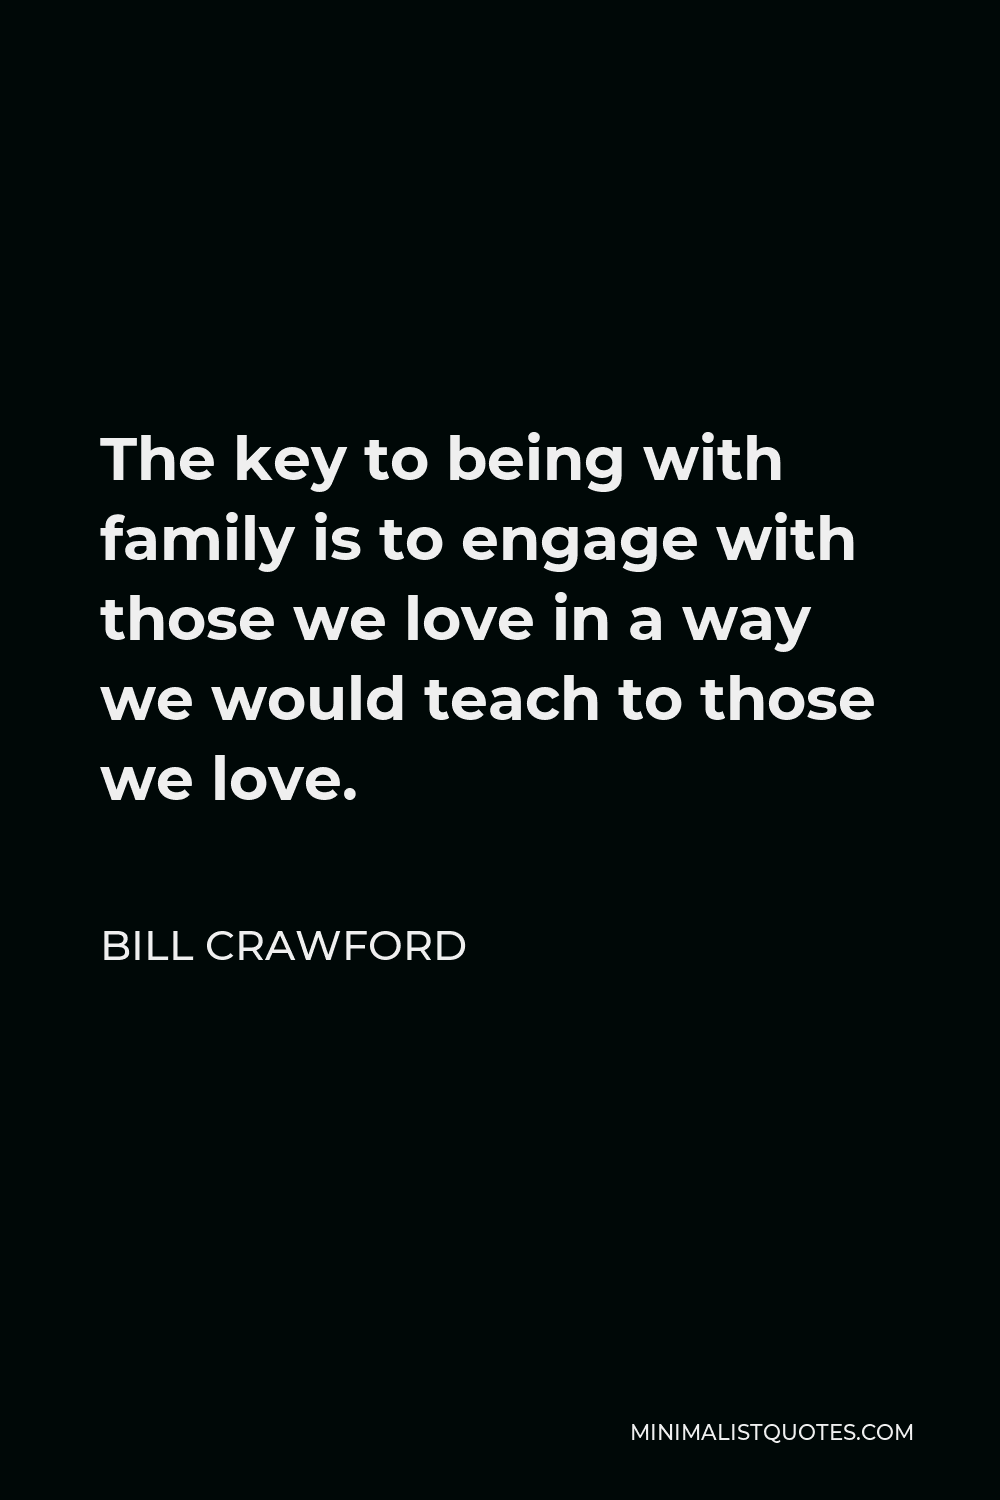 Bill Crawford Quote - The key to being with family is to engage with those we love in a way we would teach to those we love.